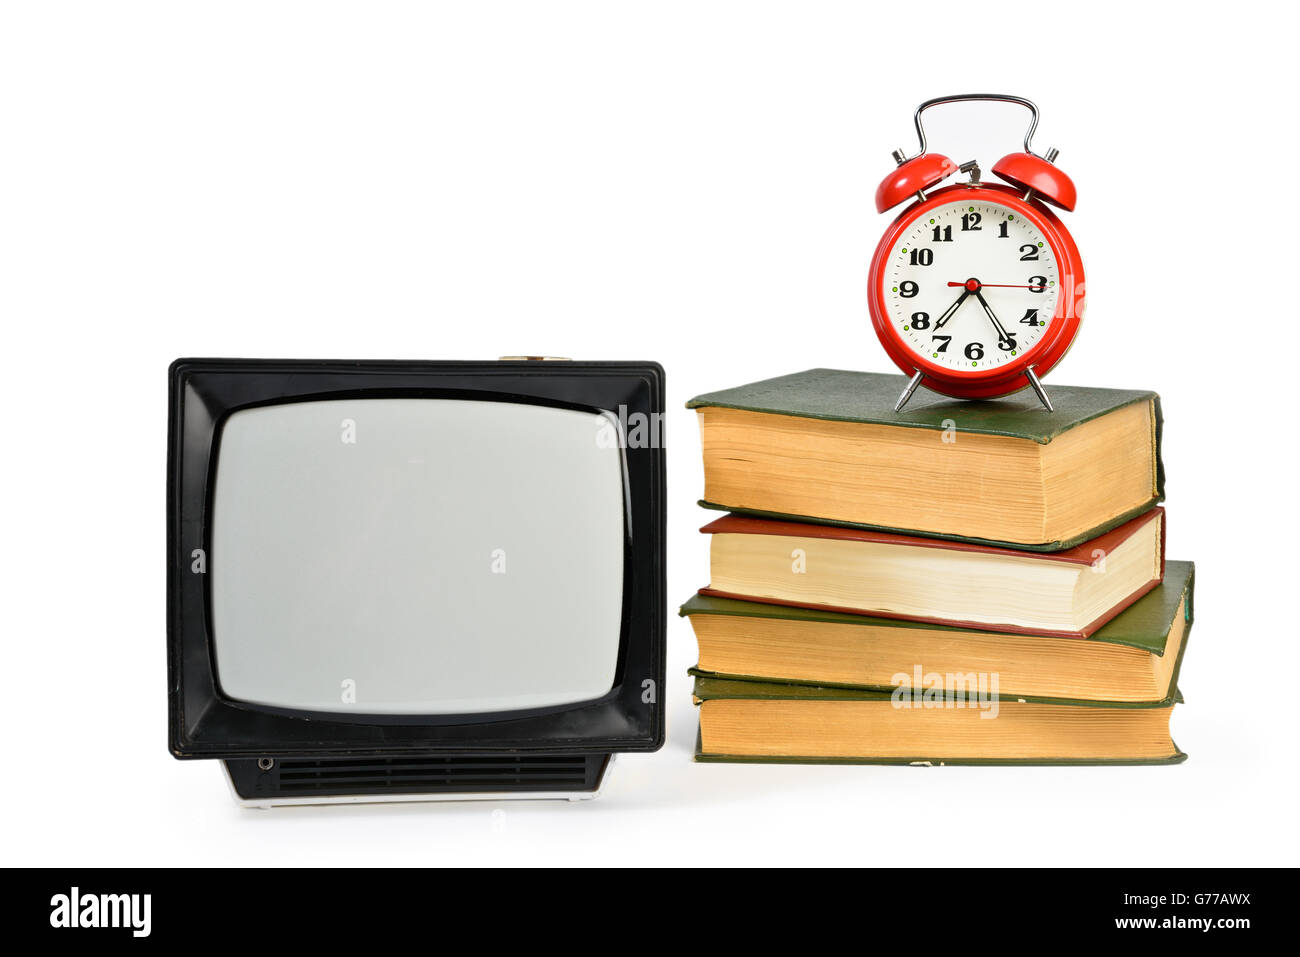 Vintage analog portable TV, some old books and retro alarm clock  isolated on white Stock Photo